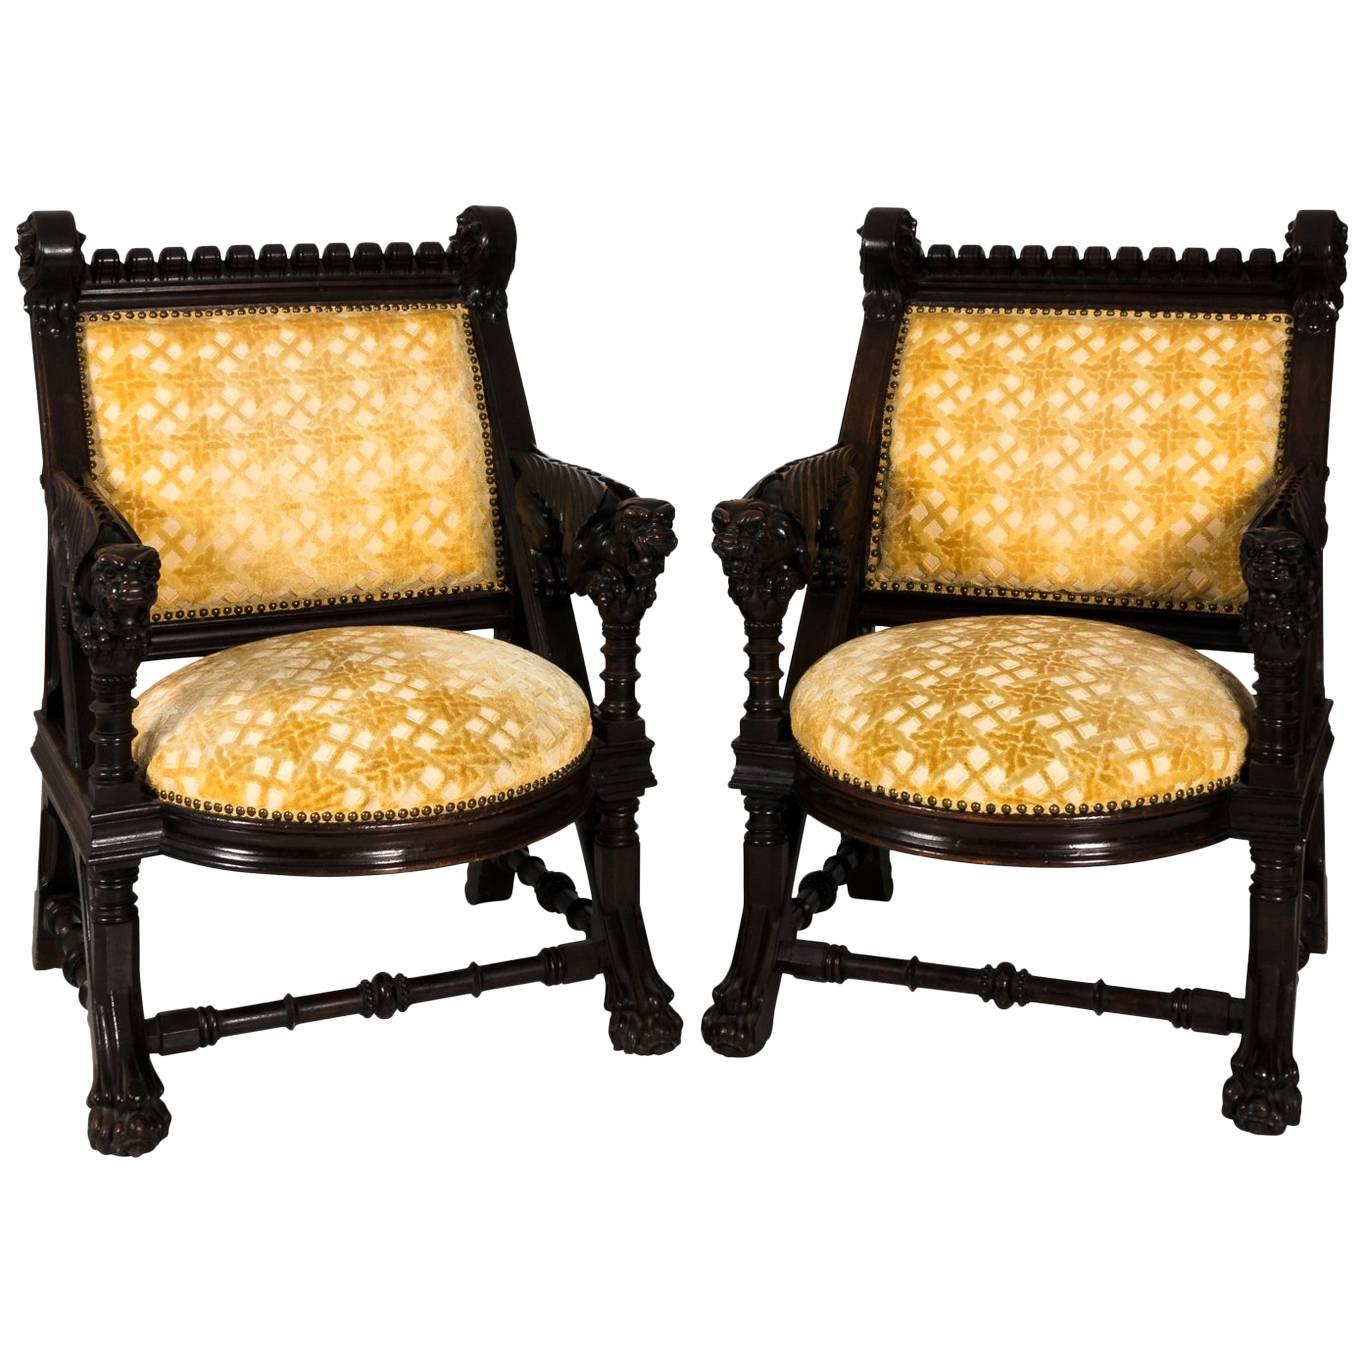 Pair of American Gothic Revival Armchairs by Daniel Pabst, circa 1878 For Sale